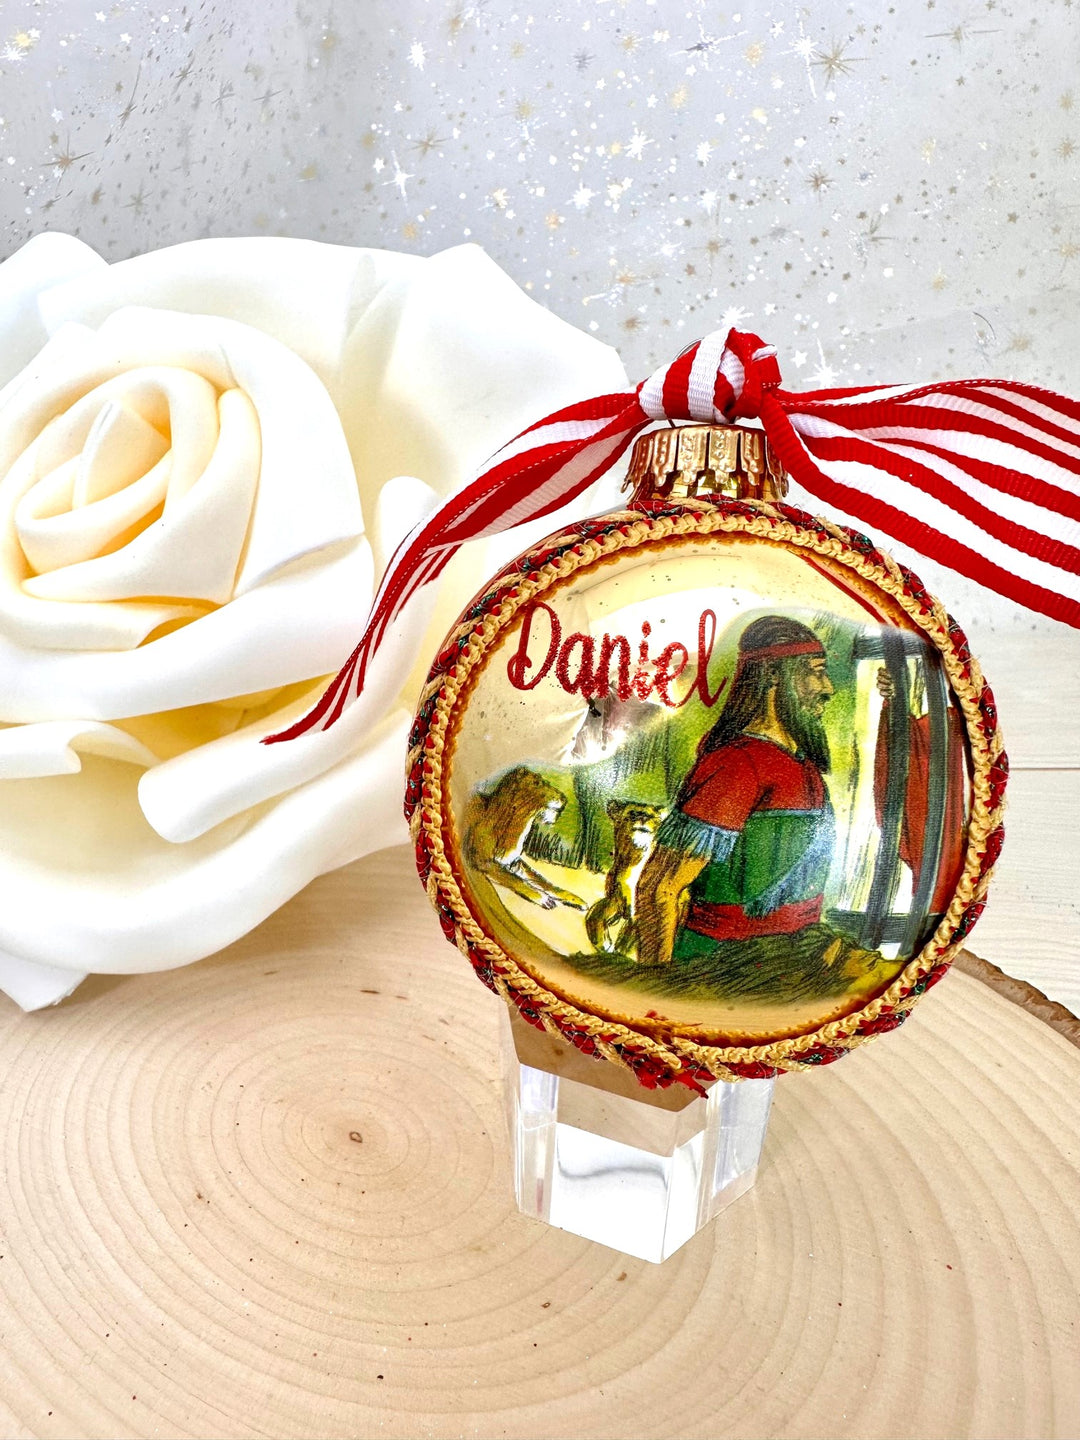 3 1/4" Collectable Bible Hero Glass Ornament Made in USA | Hugs Special Occasions Keepsake Gifts |  (Bible Hero Daniel)